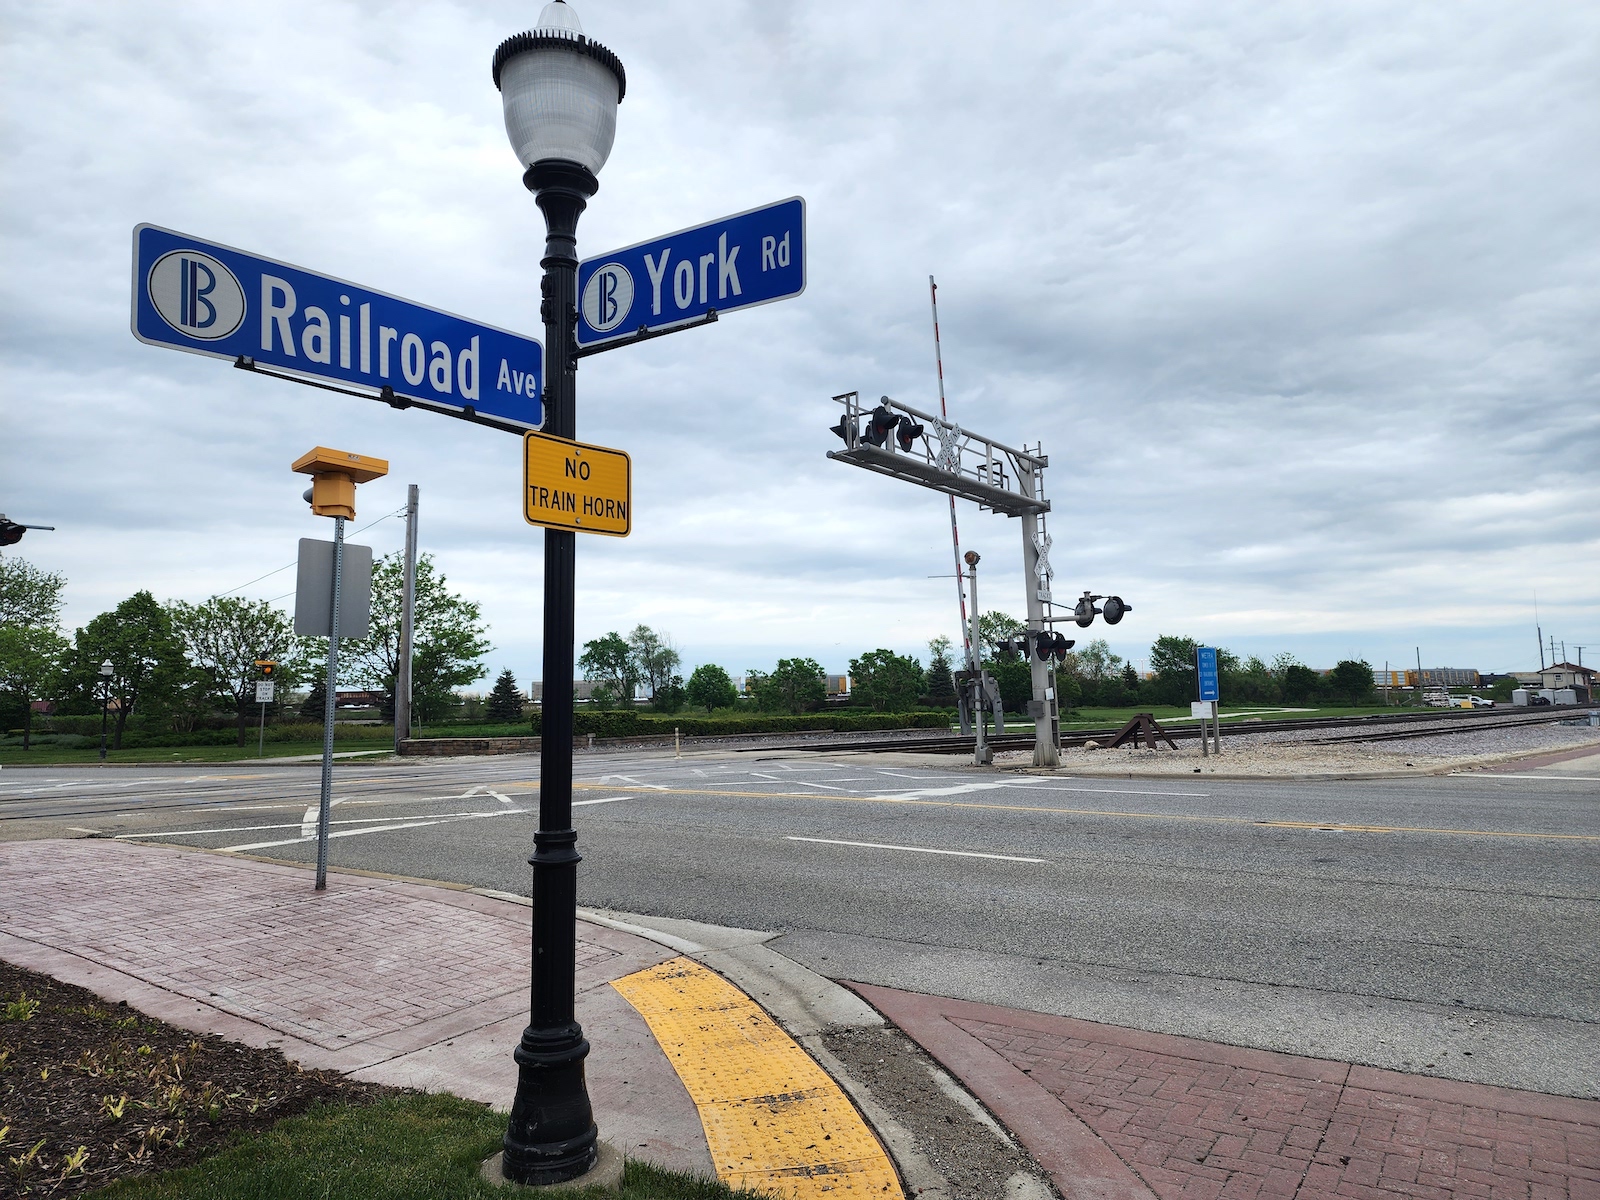 A sign marks the intersection of Railroad Ave and York Road in Bensenville, Illinois.